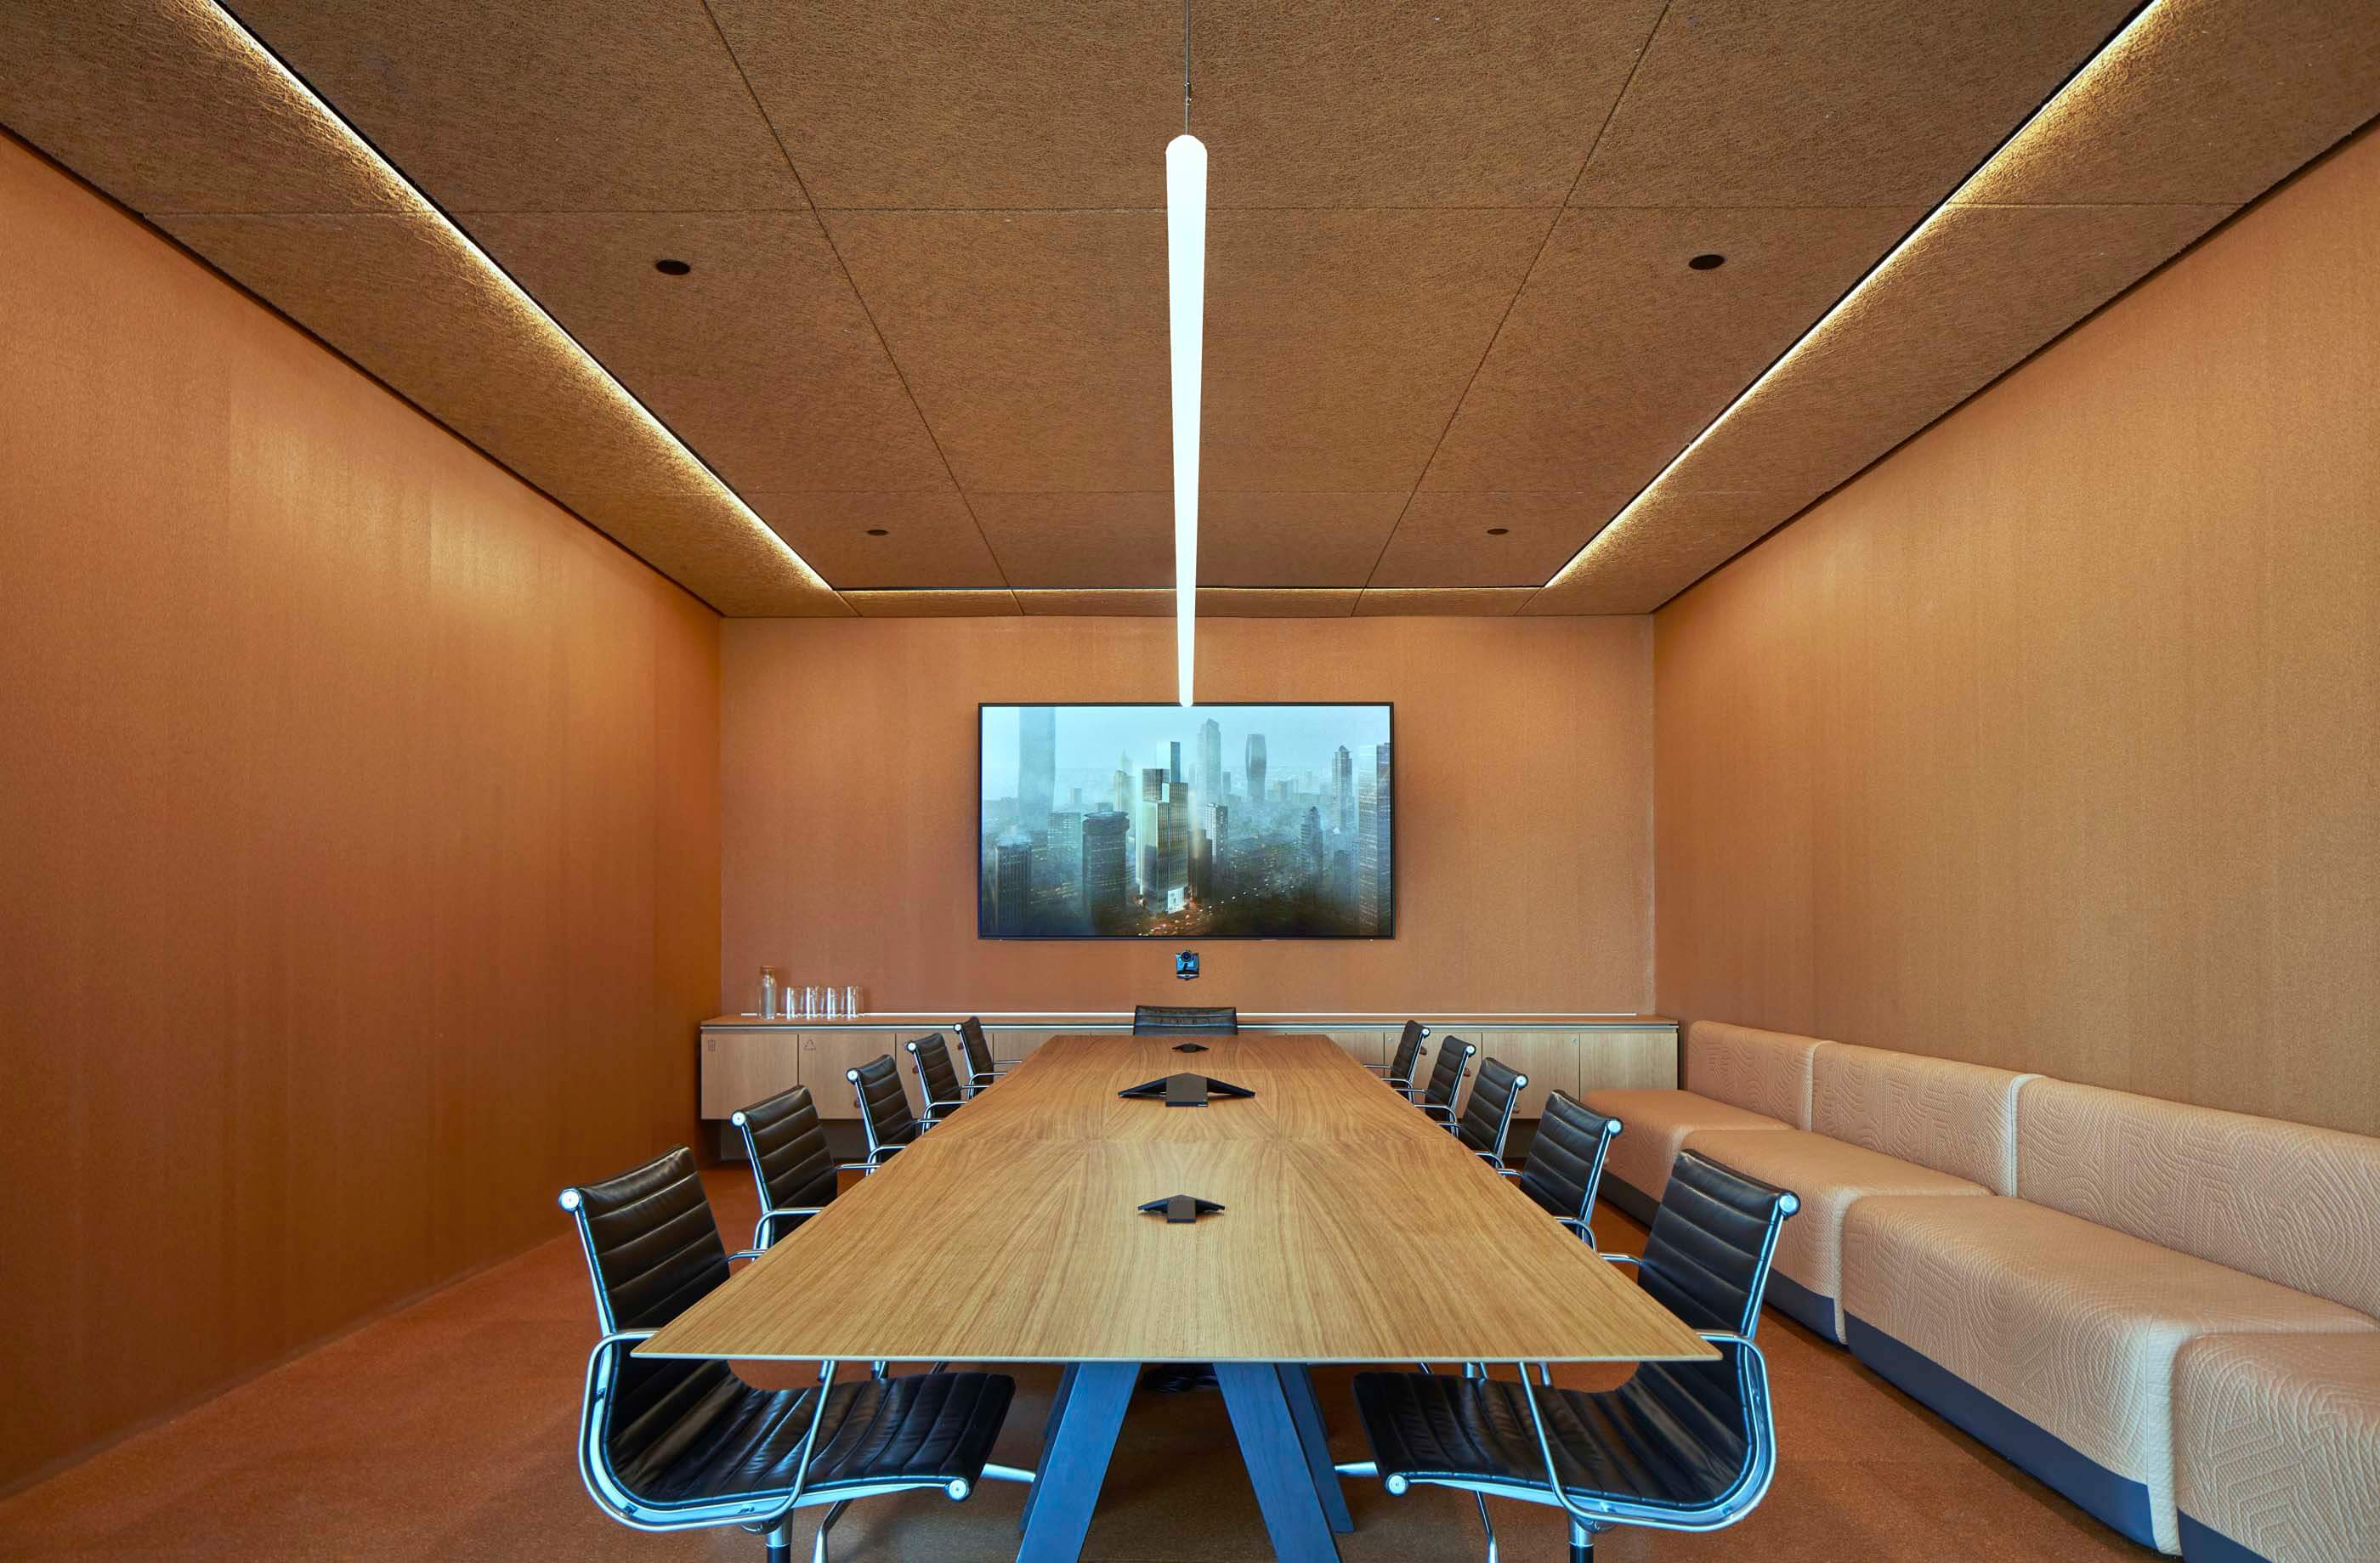 conference room with cork walls for sound absorption